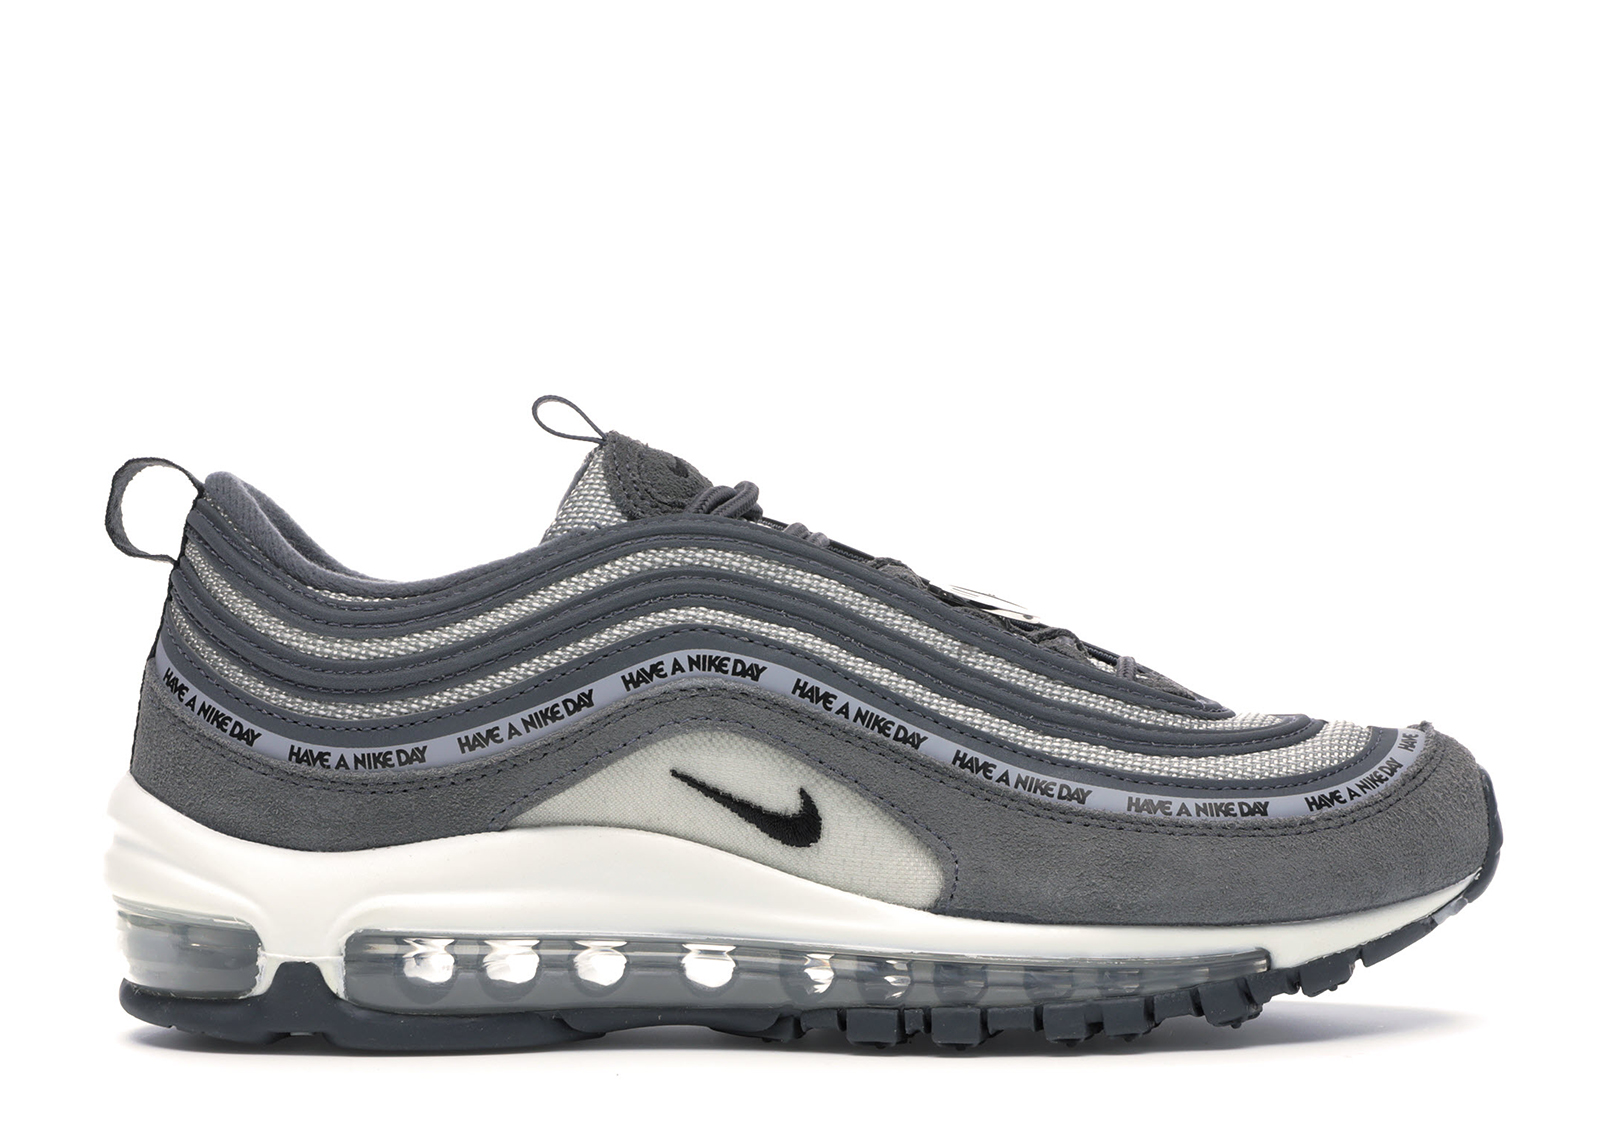 have a nike day air max 97 size 7